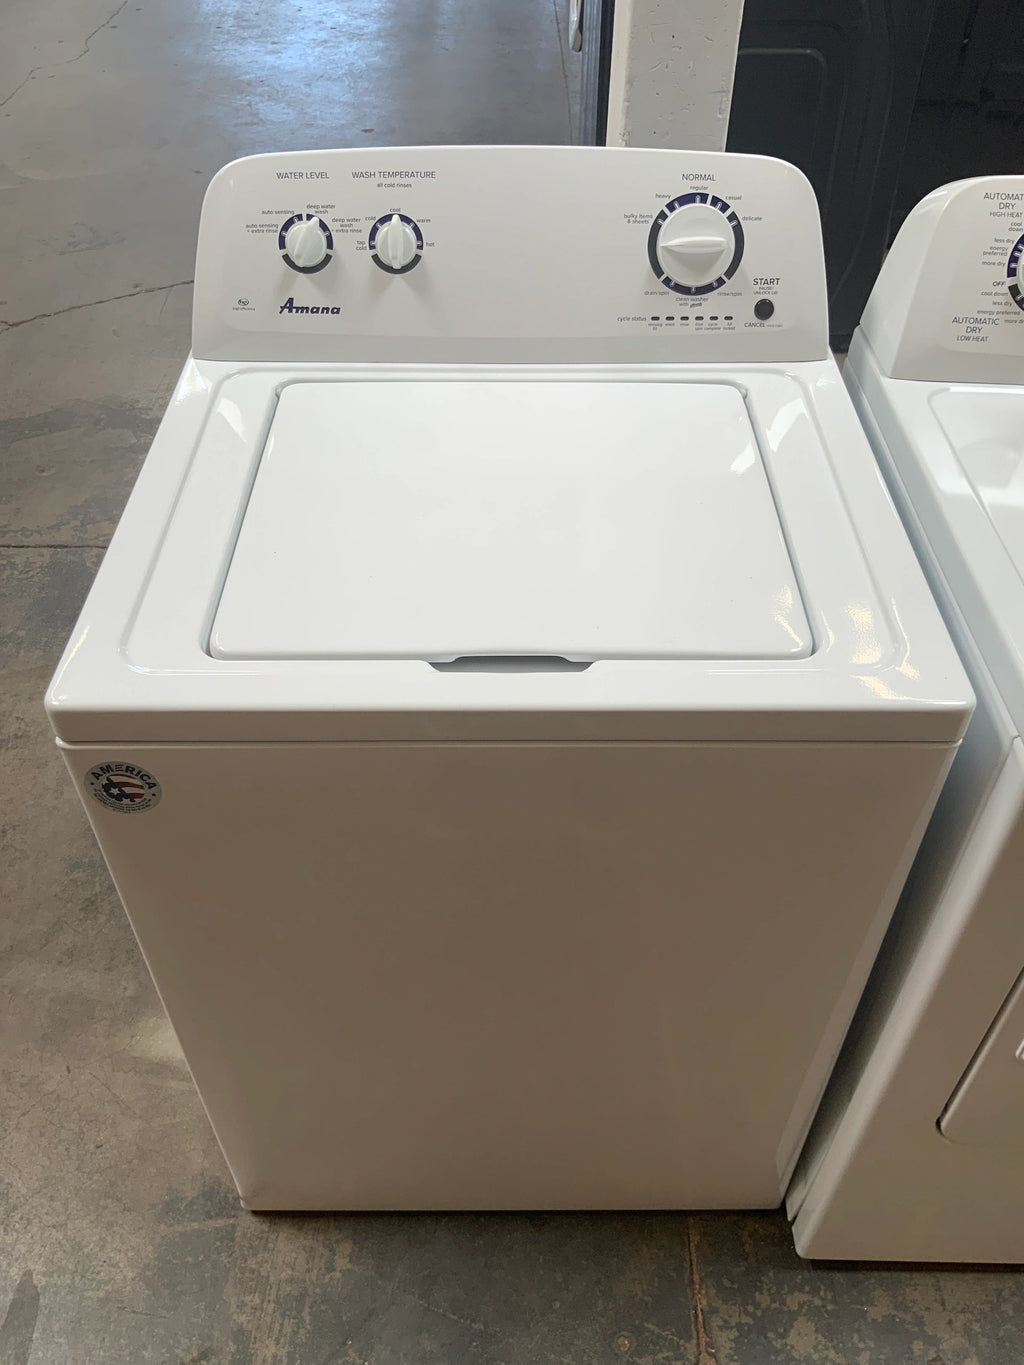 New Dent and Scratch. 3.5 cu. ft. Top-Load Washer with Dual Action Agitator Model: NTW4516FW3